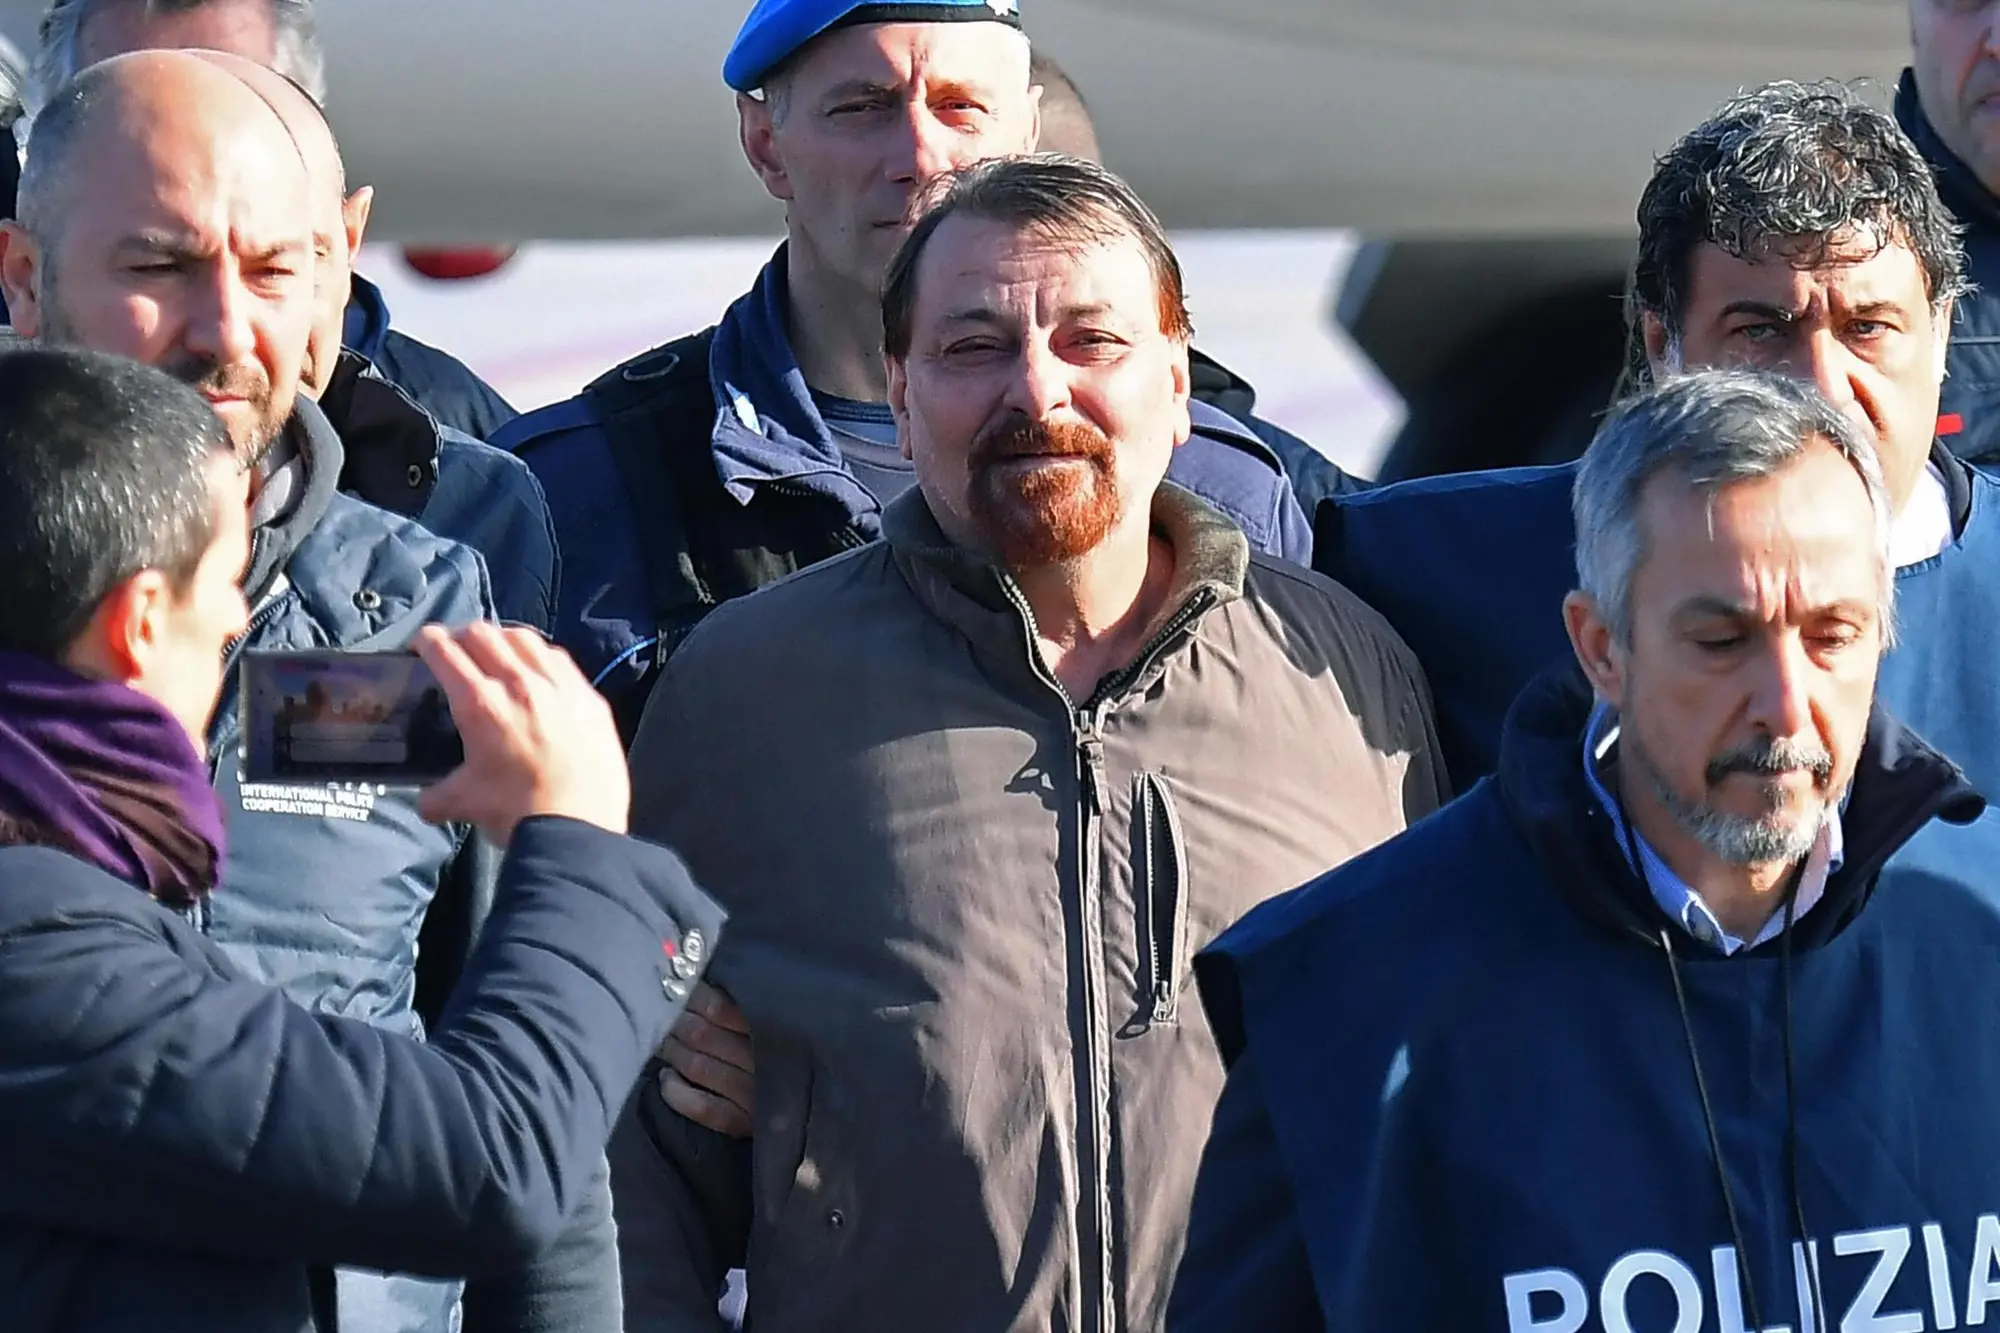 Former far-left militant Cesare Battisti arrives escorted by Italian police at Rome's Ciampino airport, Italy, 14 January 2019. Cesare Battisti, 64, a former member of the far-left terrorist group Armed Proletarians for Communism (PAC), was arrested in Bolivia after 38-years as a fugitive of the Italian justice. He is set to serve a life sentence for four murders committed in Italy's 'years of lead' of political violence in the 1970s and 1980s, media reported. ANSA/ETTORE FERRARI